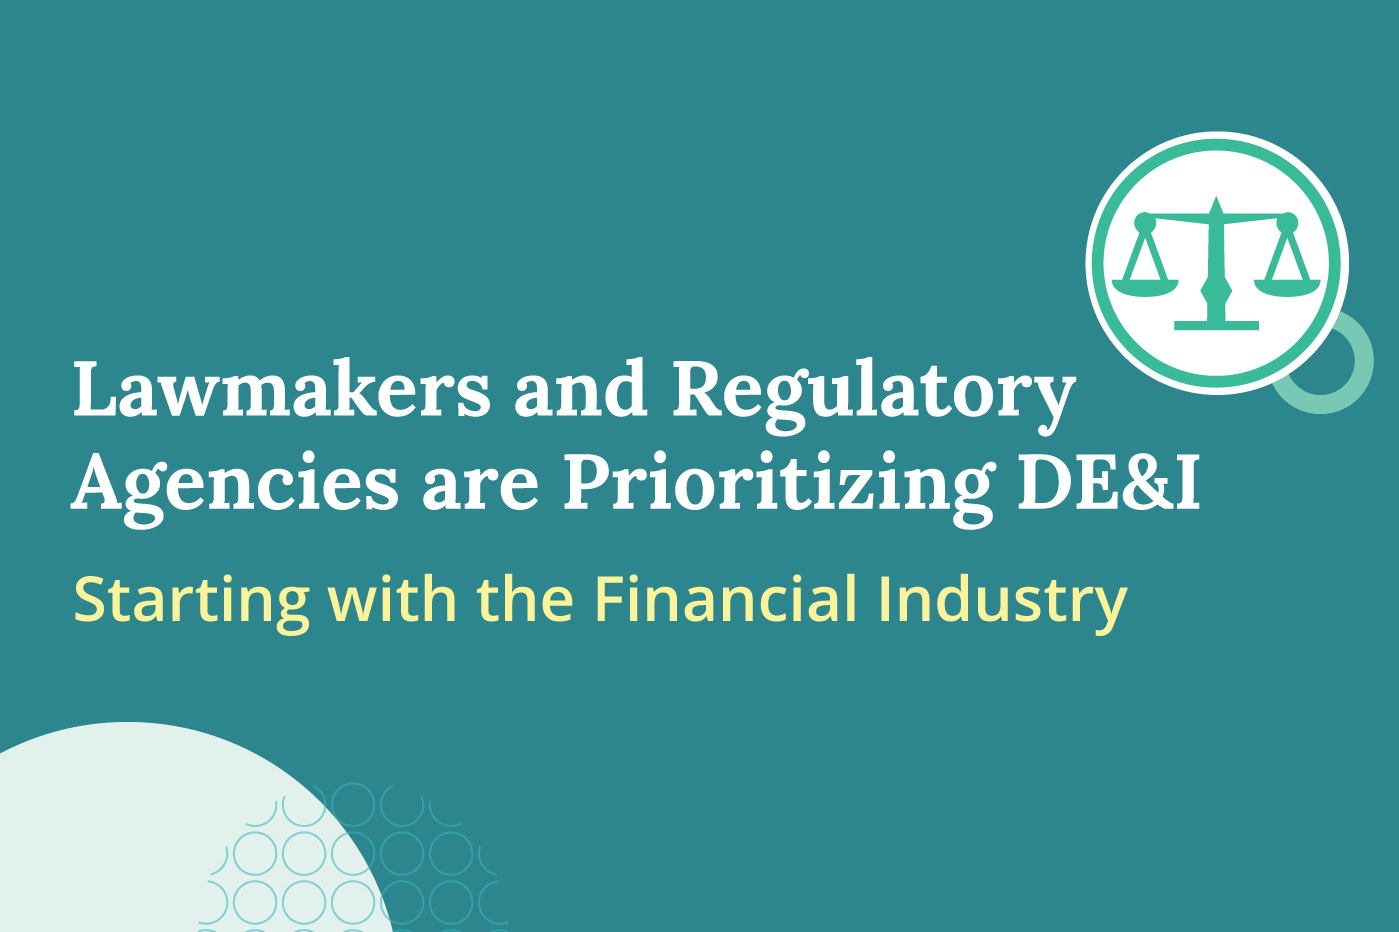 Lawmakers and Regulatory Agencies are Prioritizing DEI and Starting with the Financial Industry